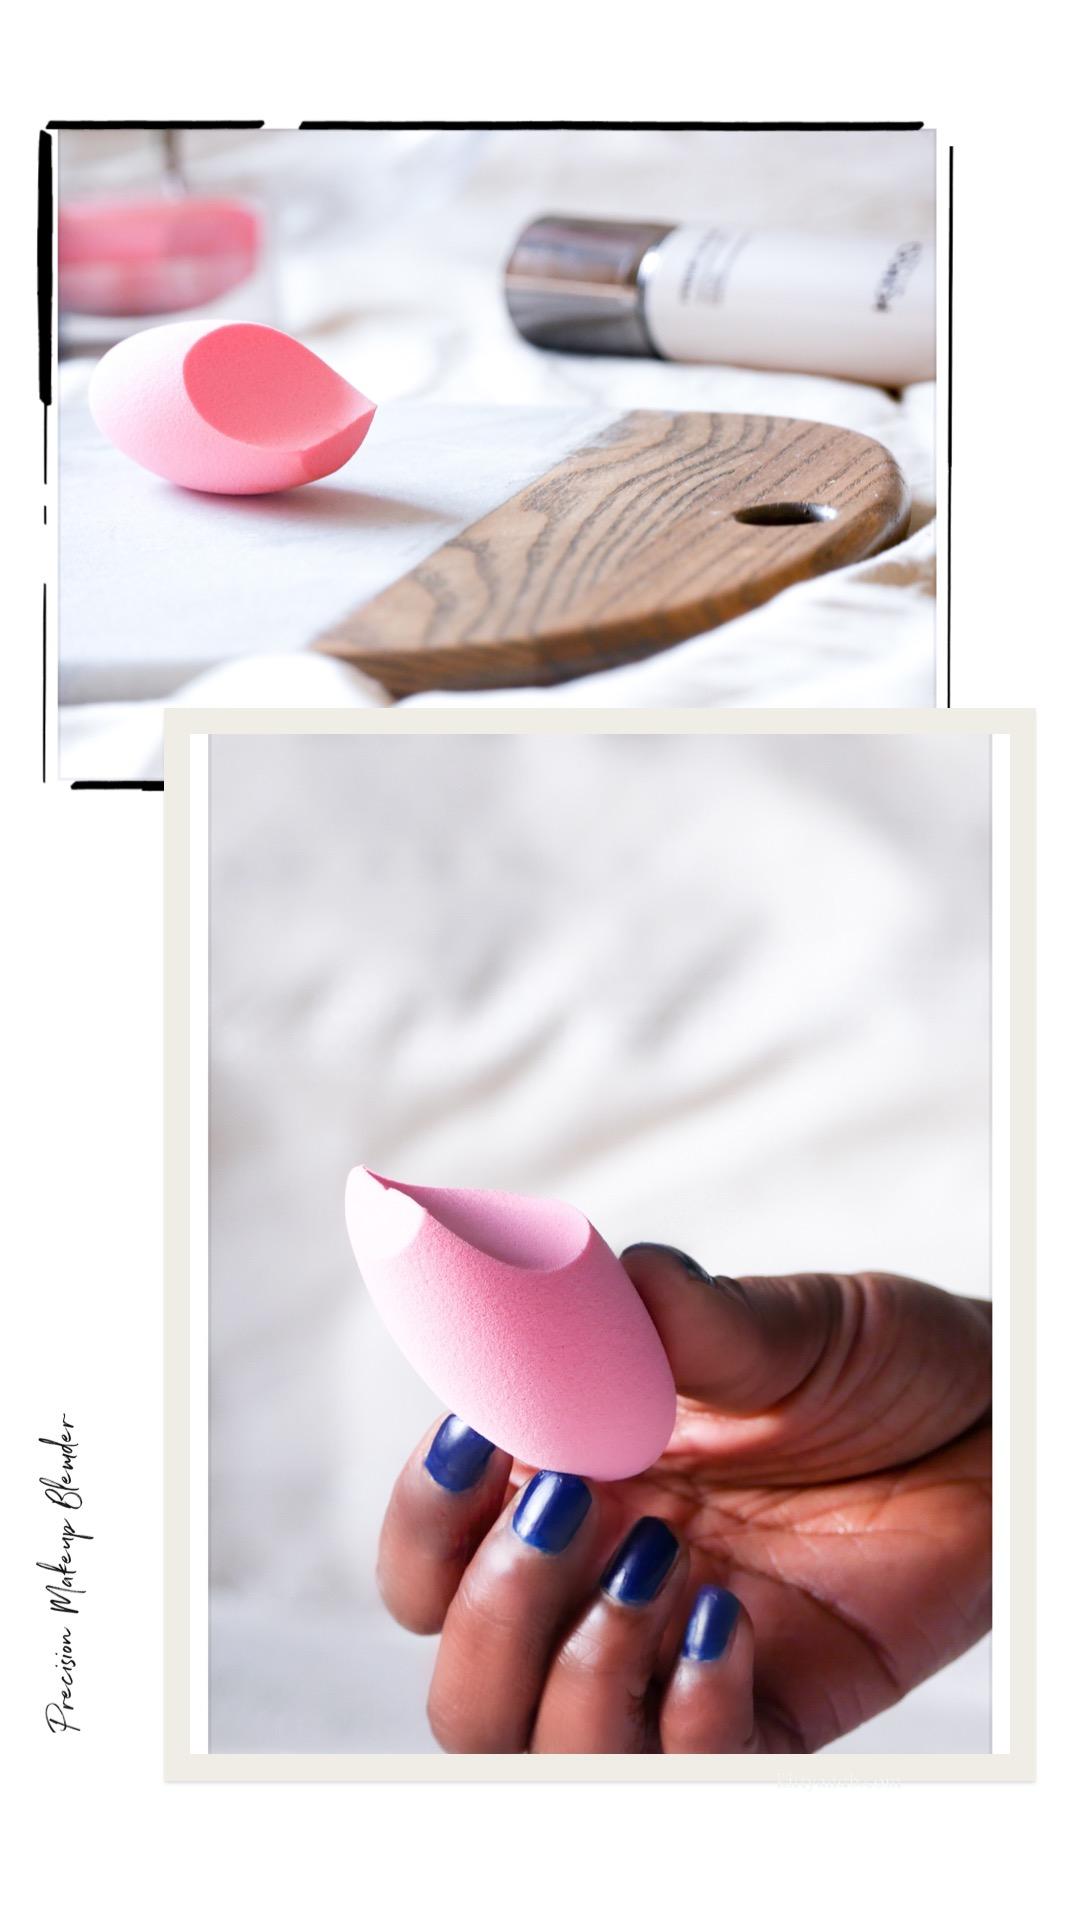 What I bought from KIKO Milano Online| My thoughts on everything I bought - all under £10, including this makeup sponge that I'm obsessed with! |If you're looking for cruelty free, affordable makeup and beauty, then you'll definitely be interested| www.kittyandb.com #KIKOTrendsetters #makeupsponge #beautyreviews #crueltyfree #beautyblog